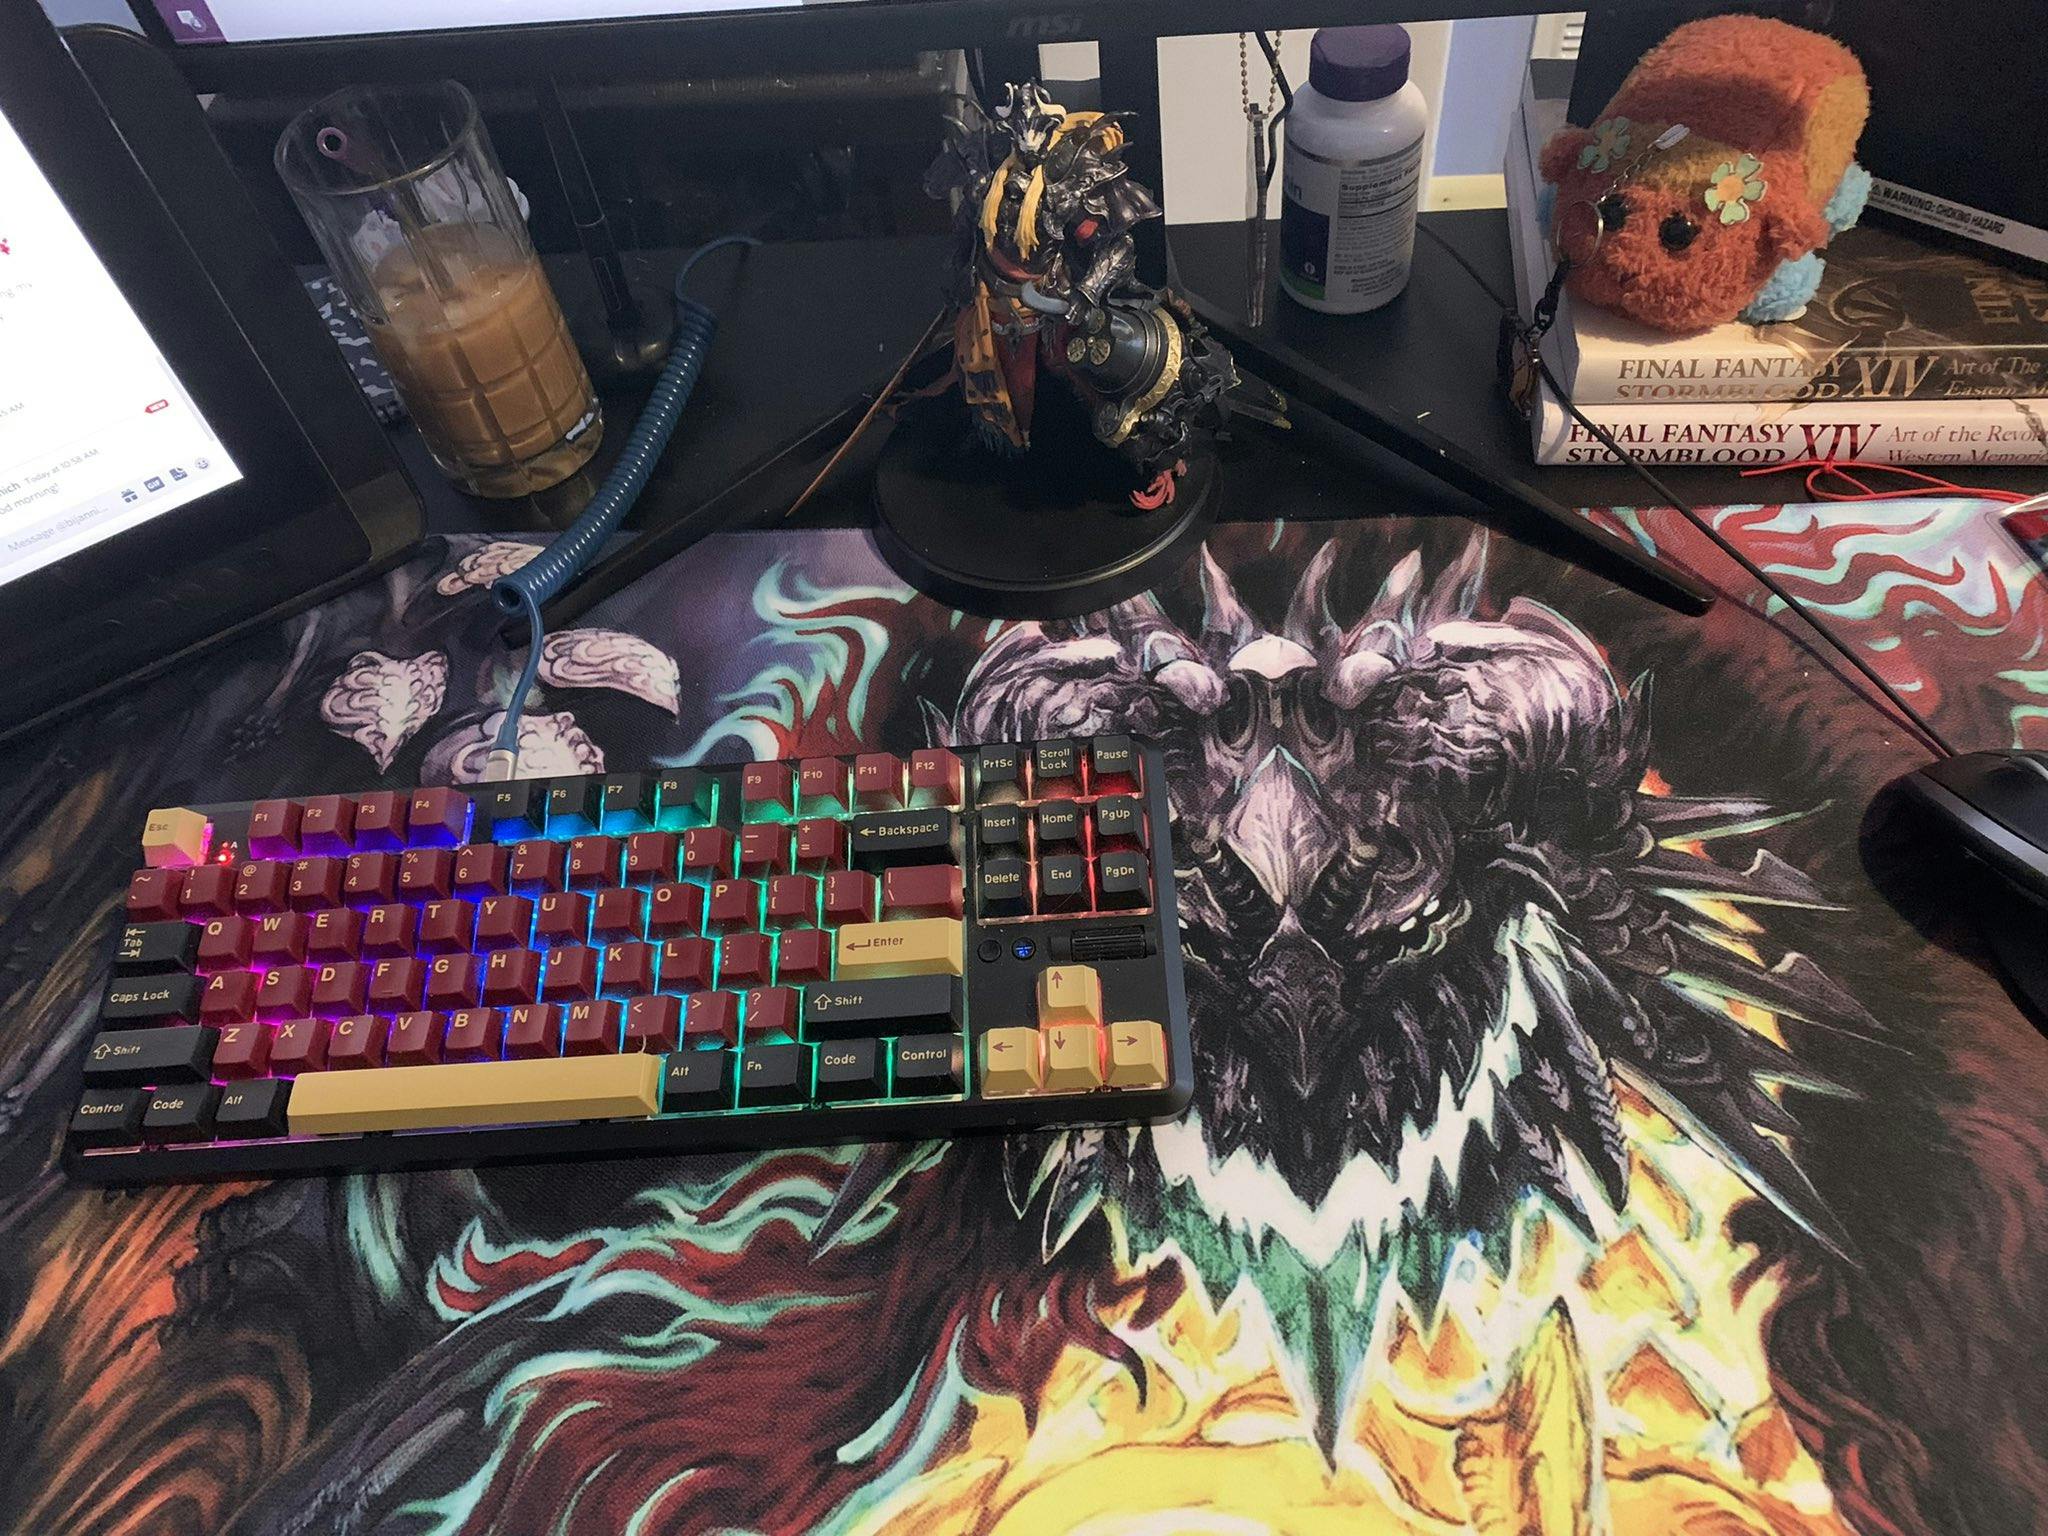 Review photo of deskmat by E.